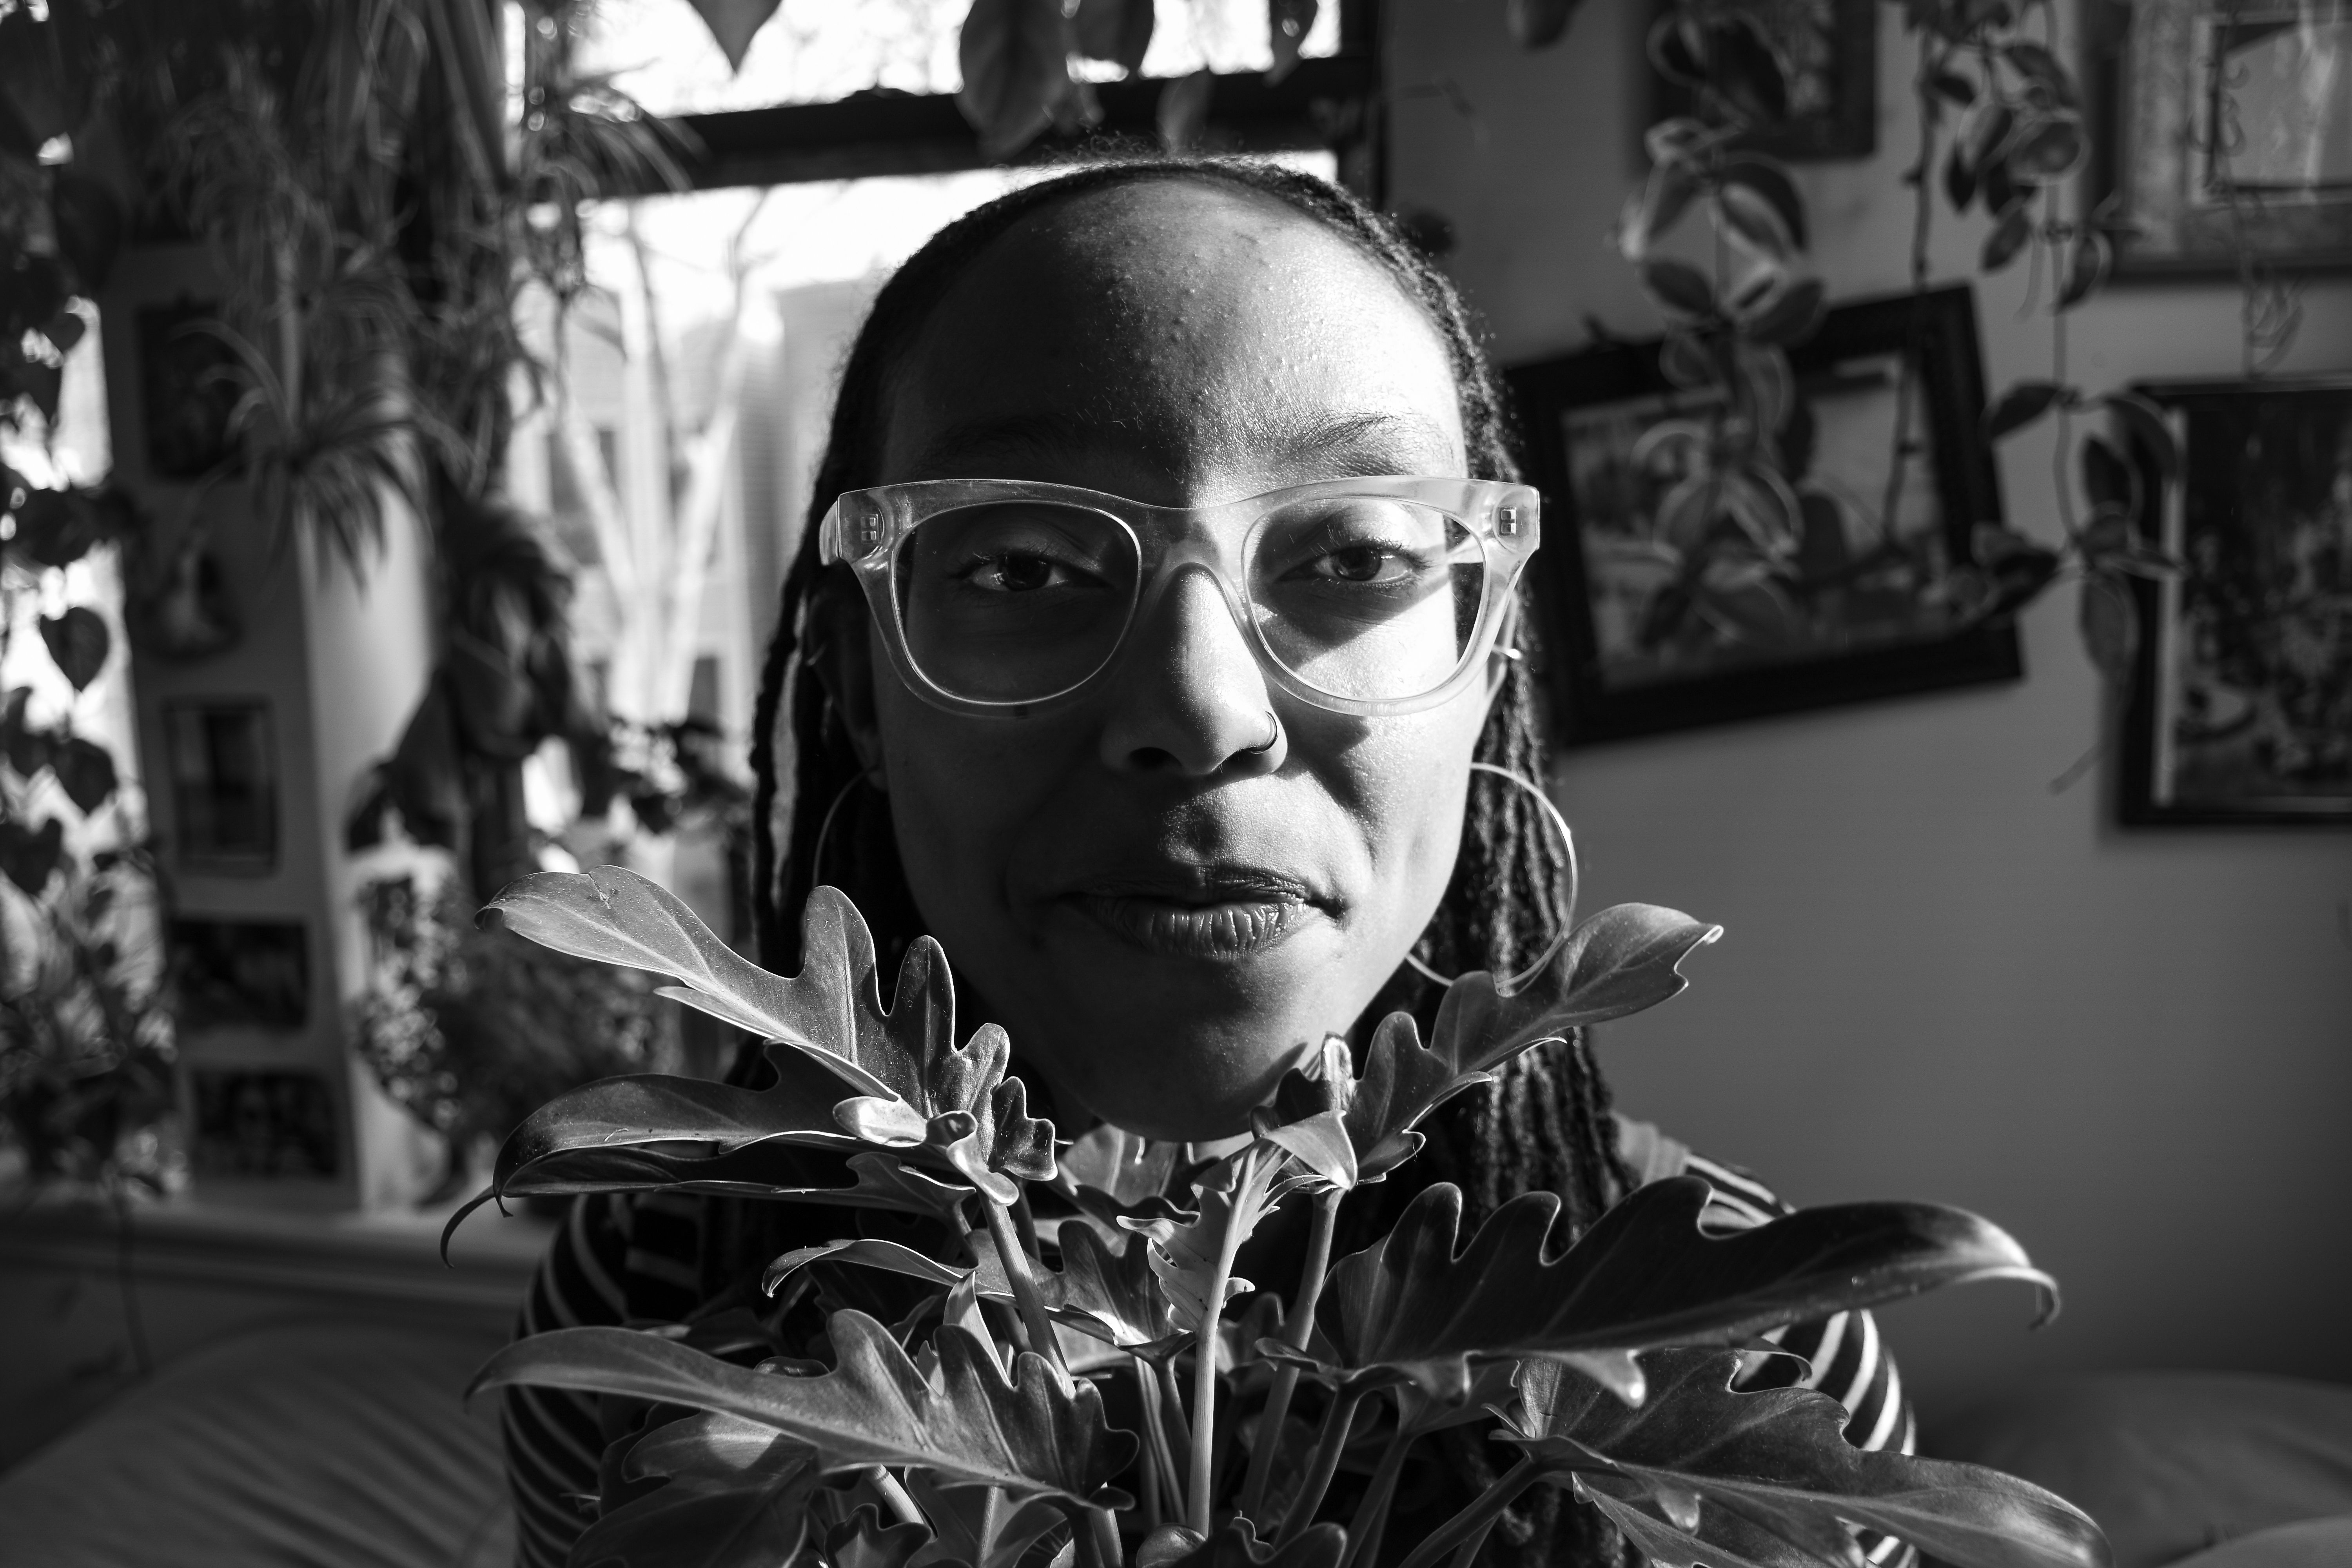 Zo with plant. Brooklyn, 2019.